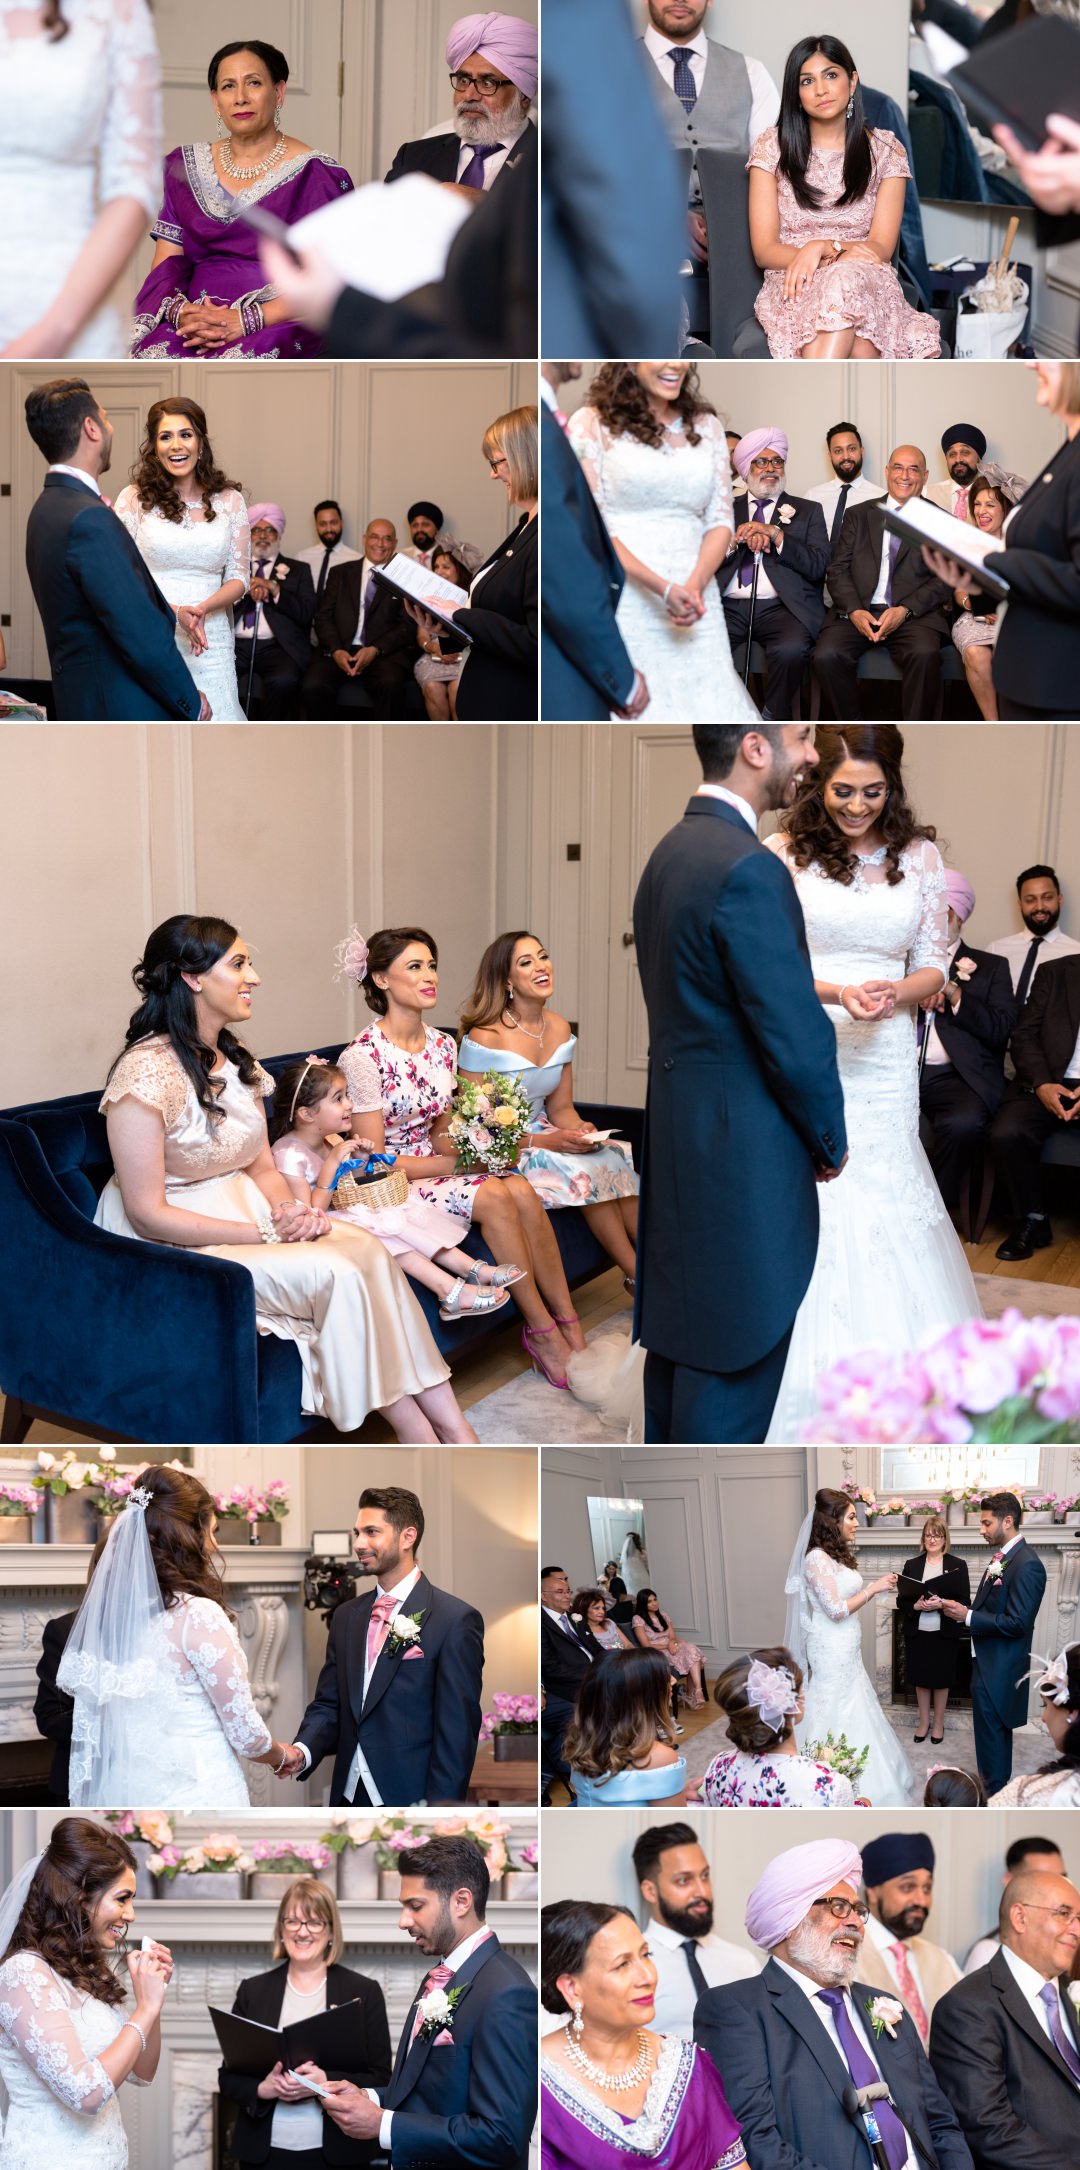 ceremony at Old Marylebone Town Hall Asian wedding 